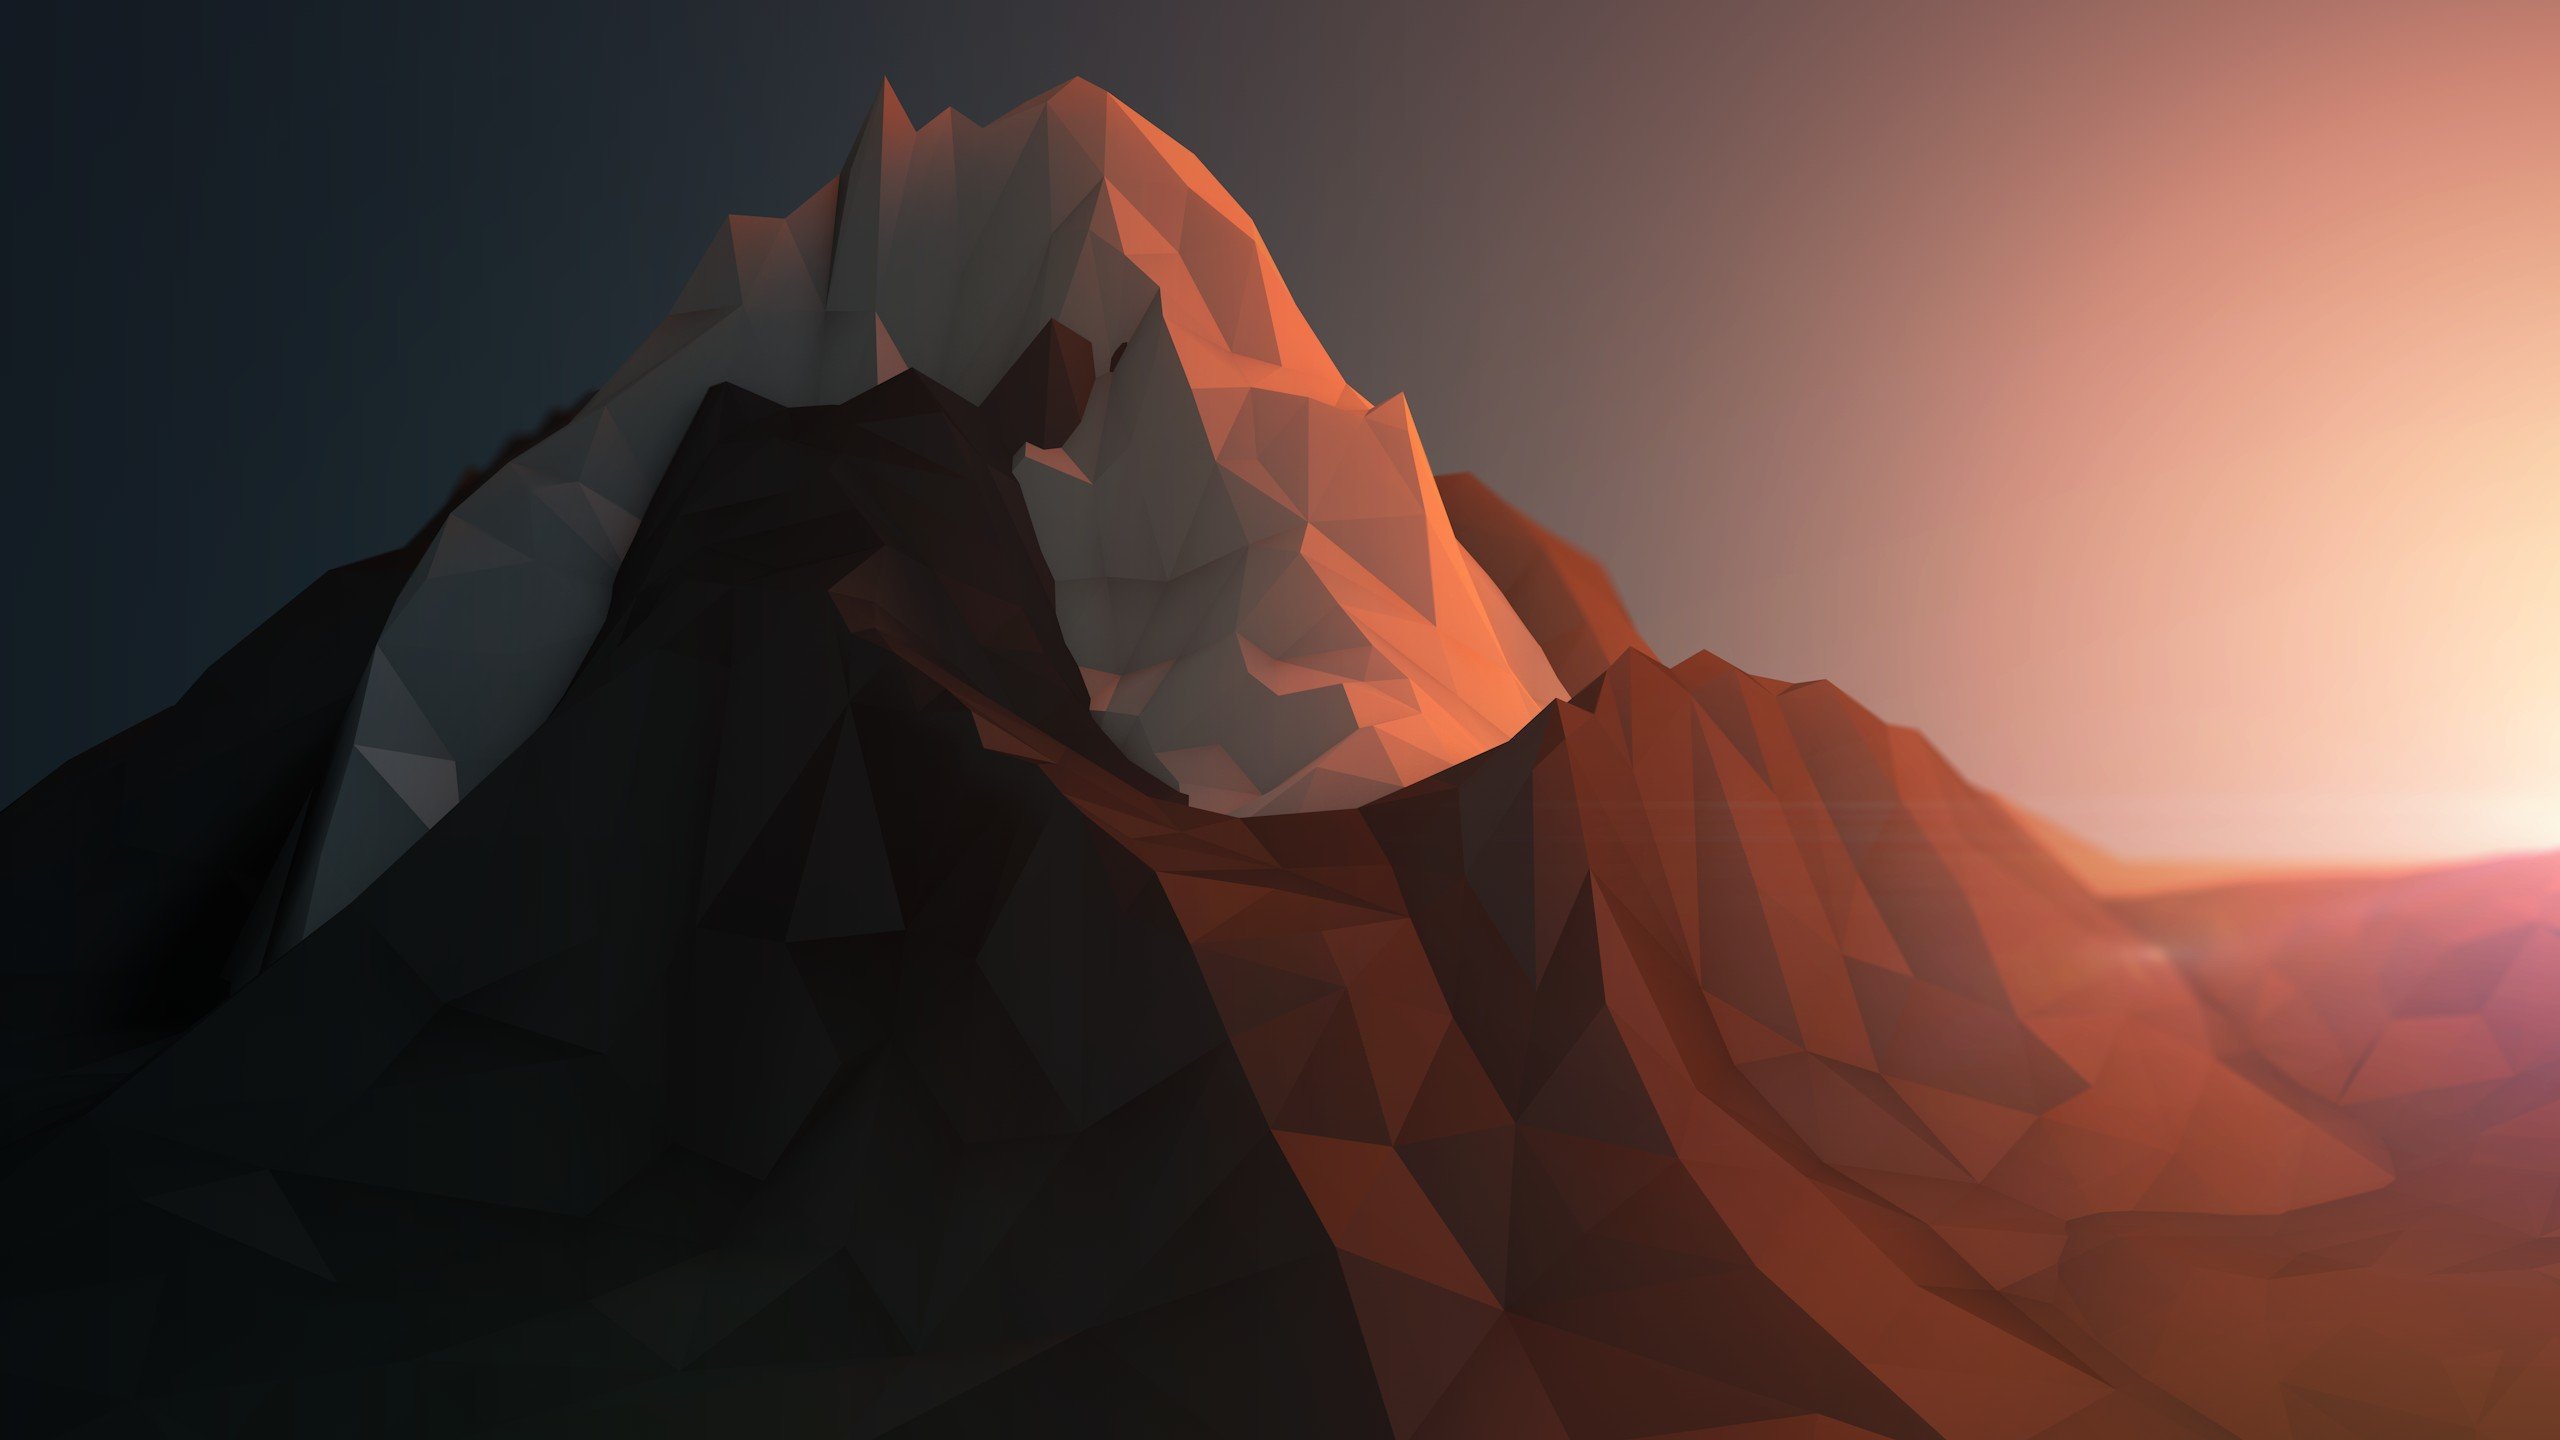 Low Poly Digital Desert Mountains Wallpapers